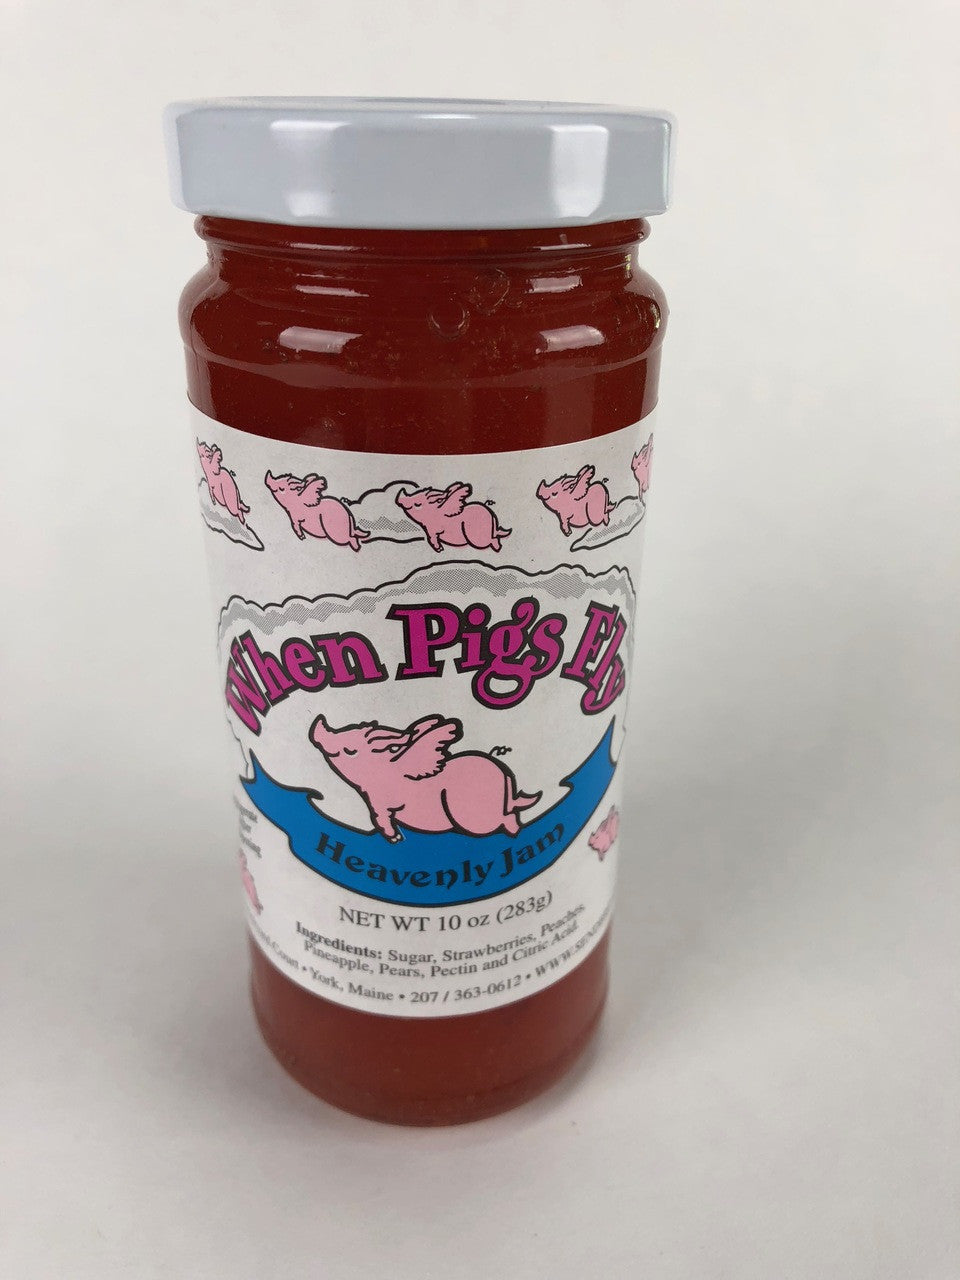 When Pigs Fly Heavenly Jam